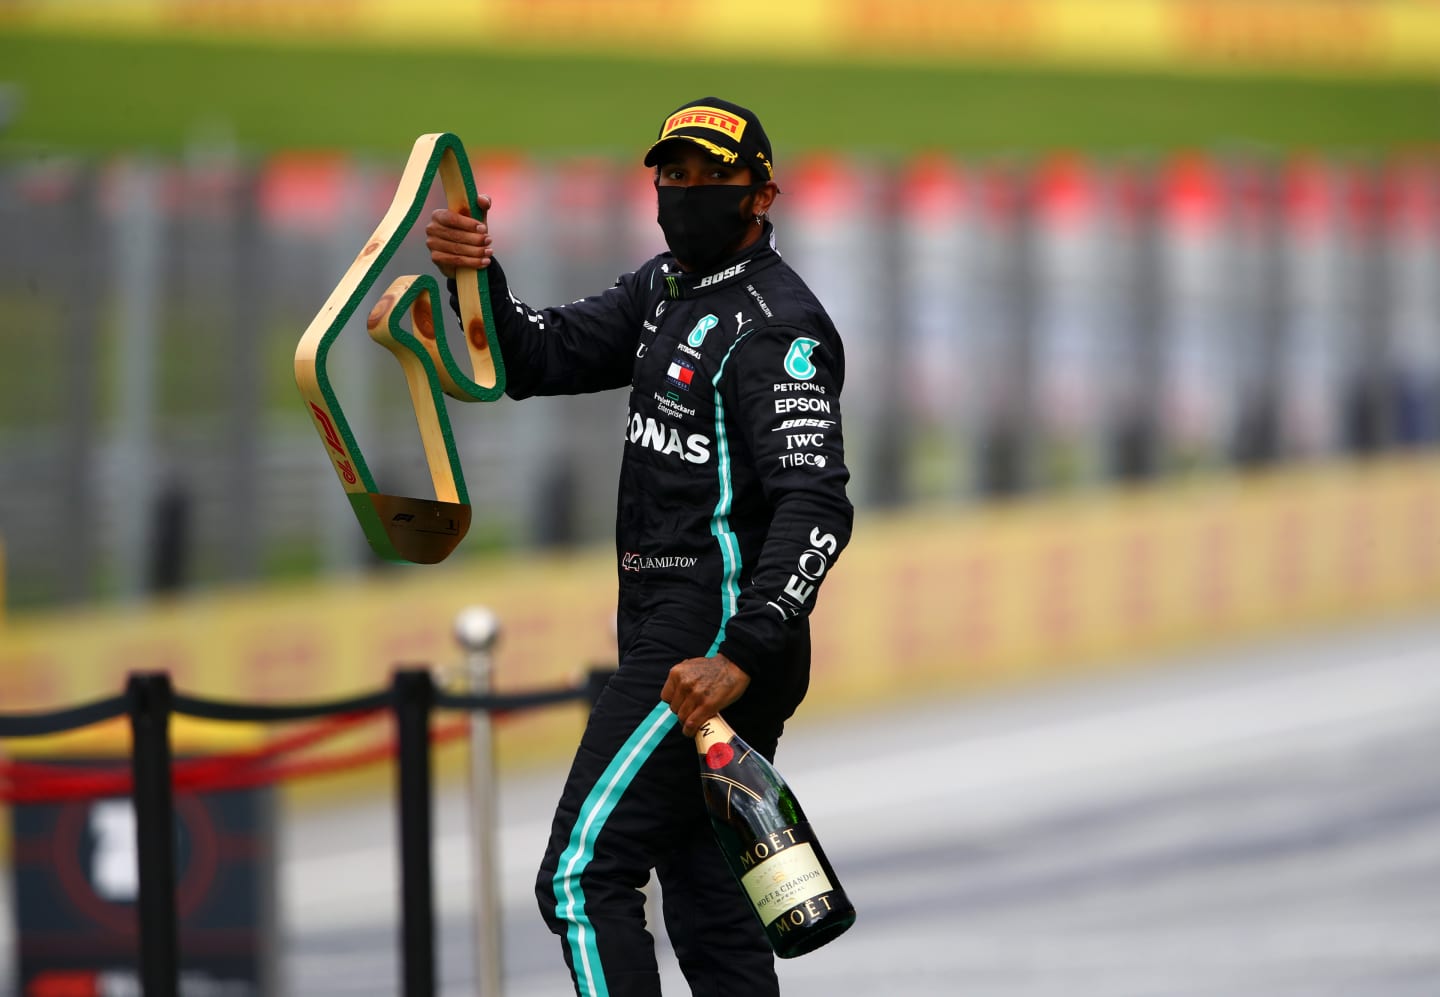 SPIELBERG, AUSTRIA - JULY 12: Lewis Hamilton of Great Britain and Mercedes GP celebrates on the